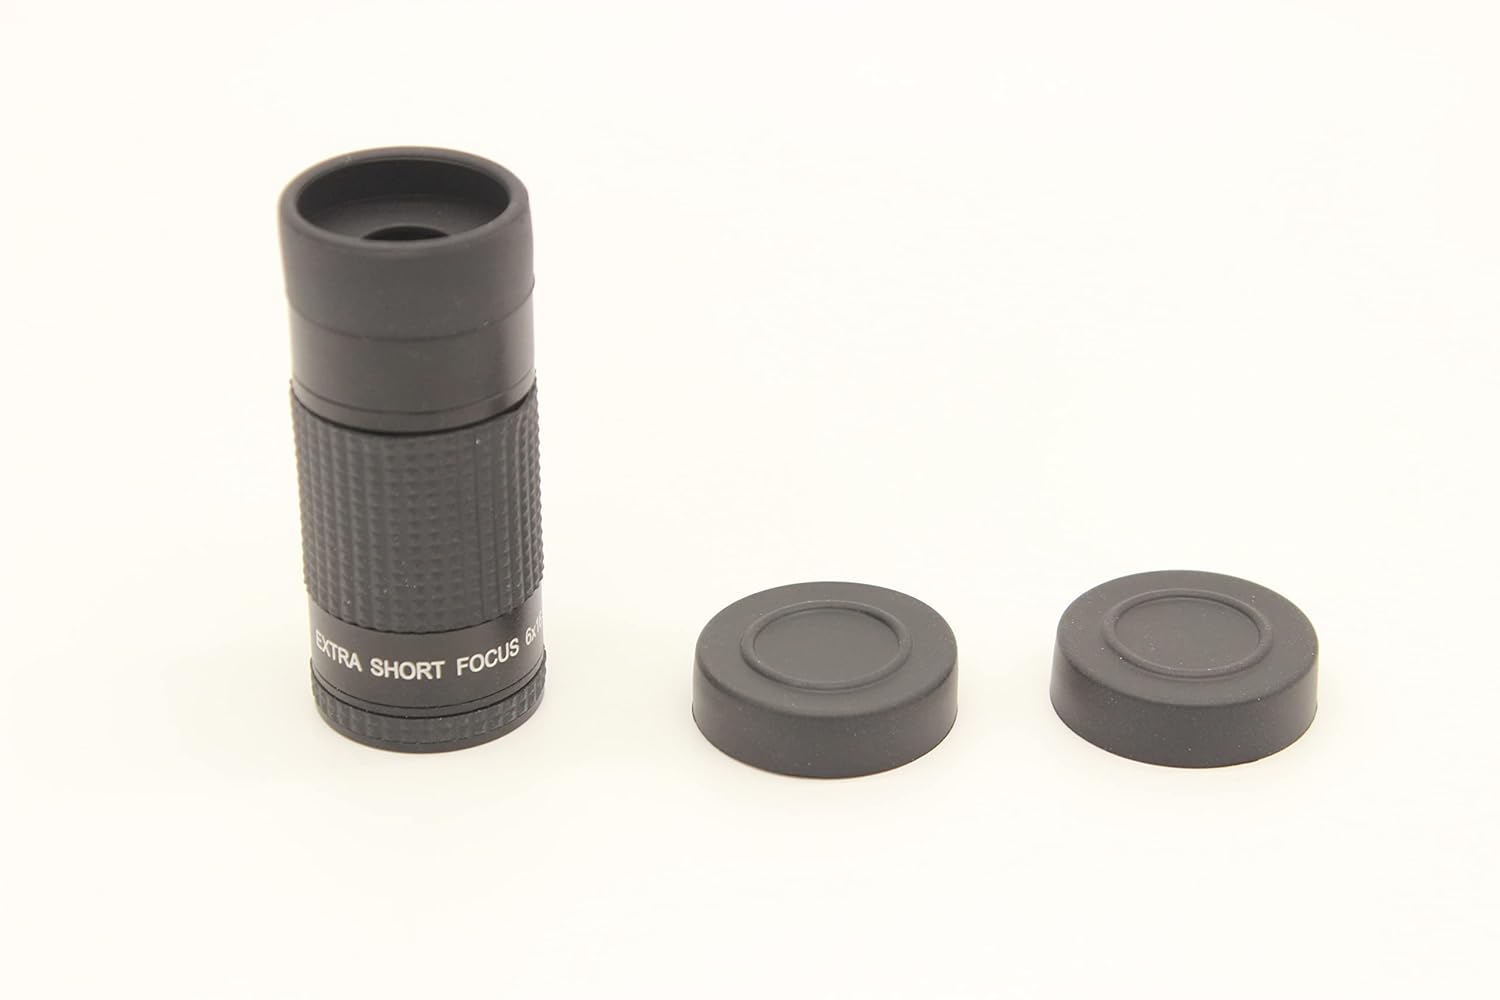 (Basic-Version) 6x16mm Extra Short Focus(Close Focus) Monocular for Short/Long Distance for Vision Impairment Monocular for Bird Watching, Hunting, Fishing, Sport Events